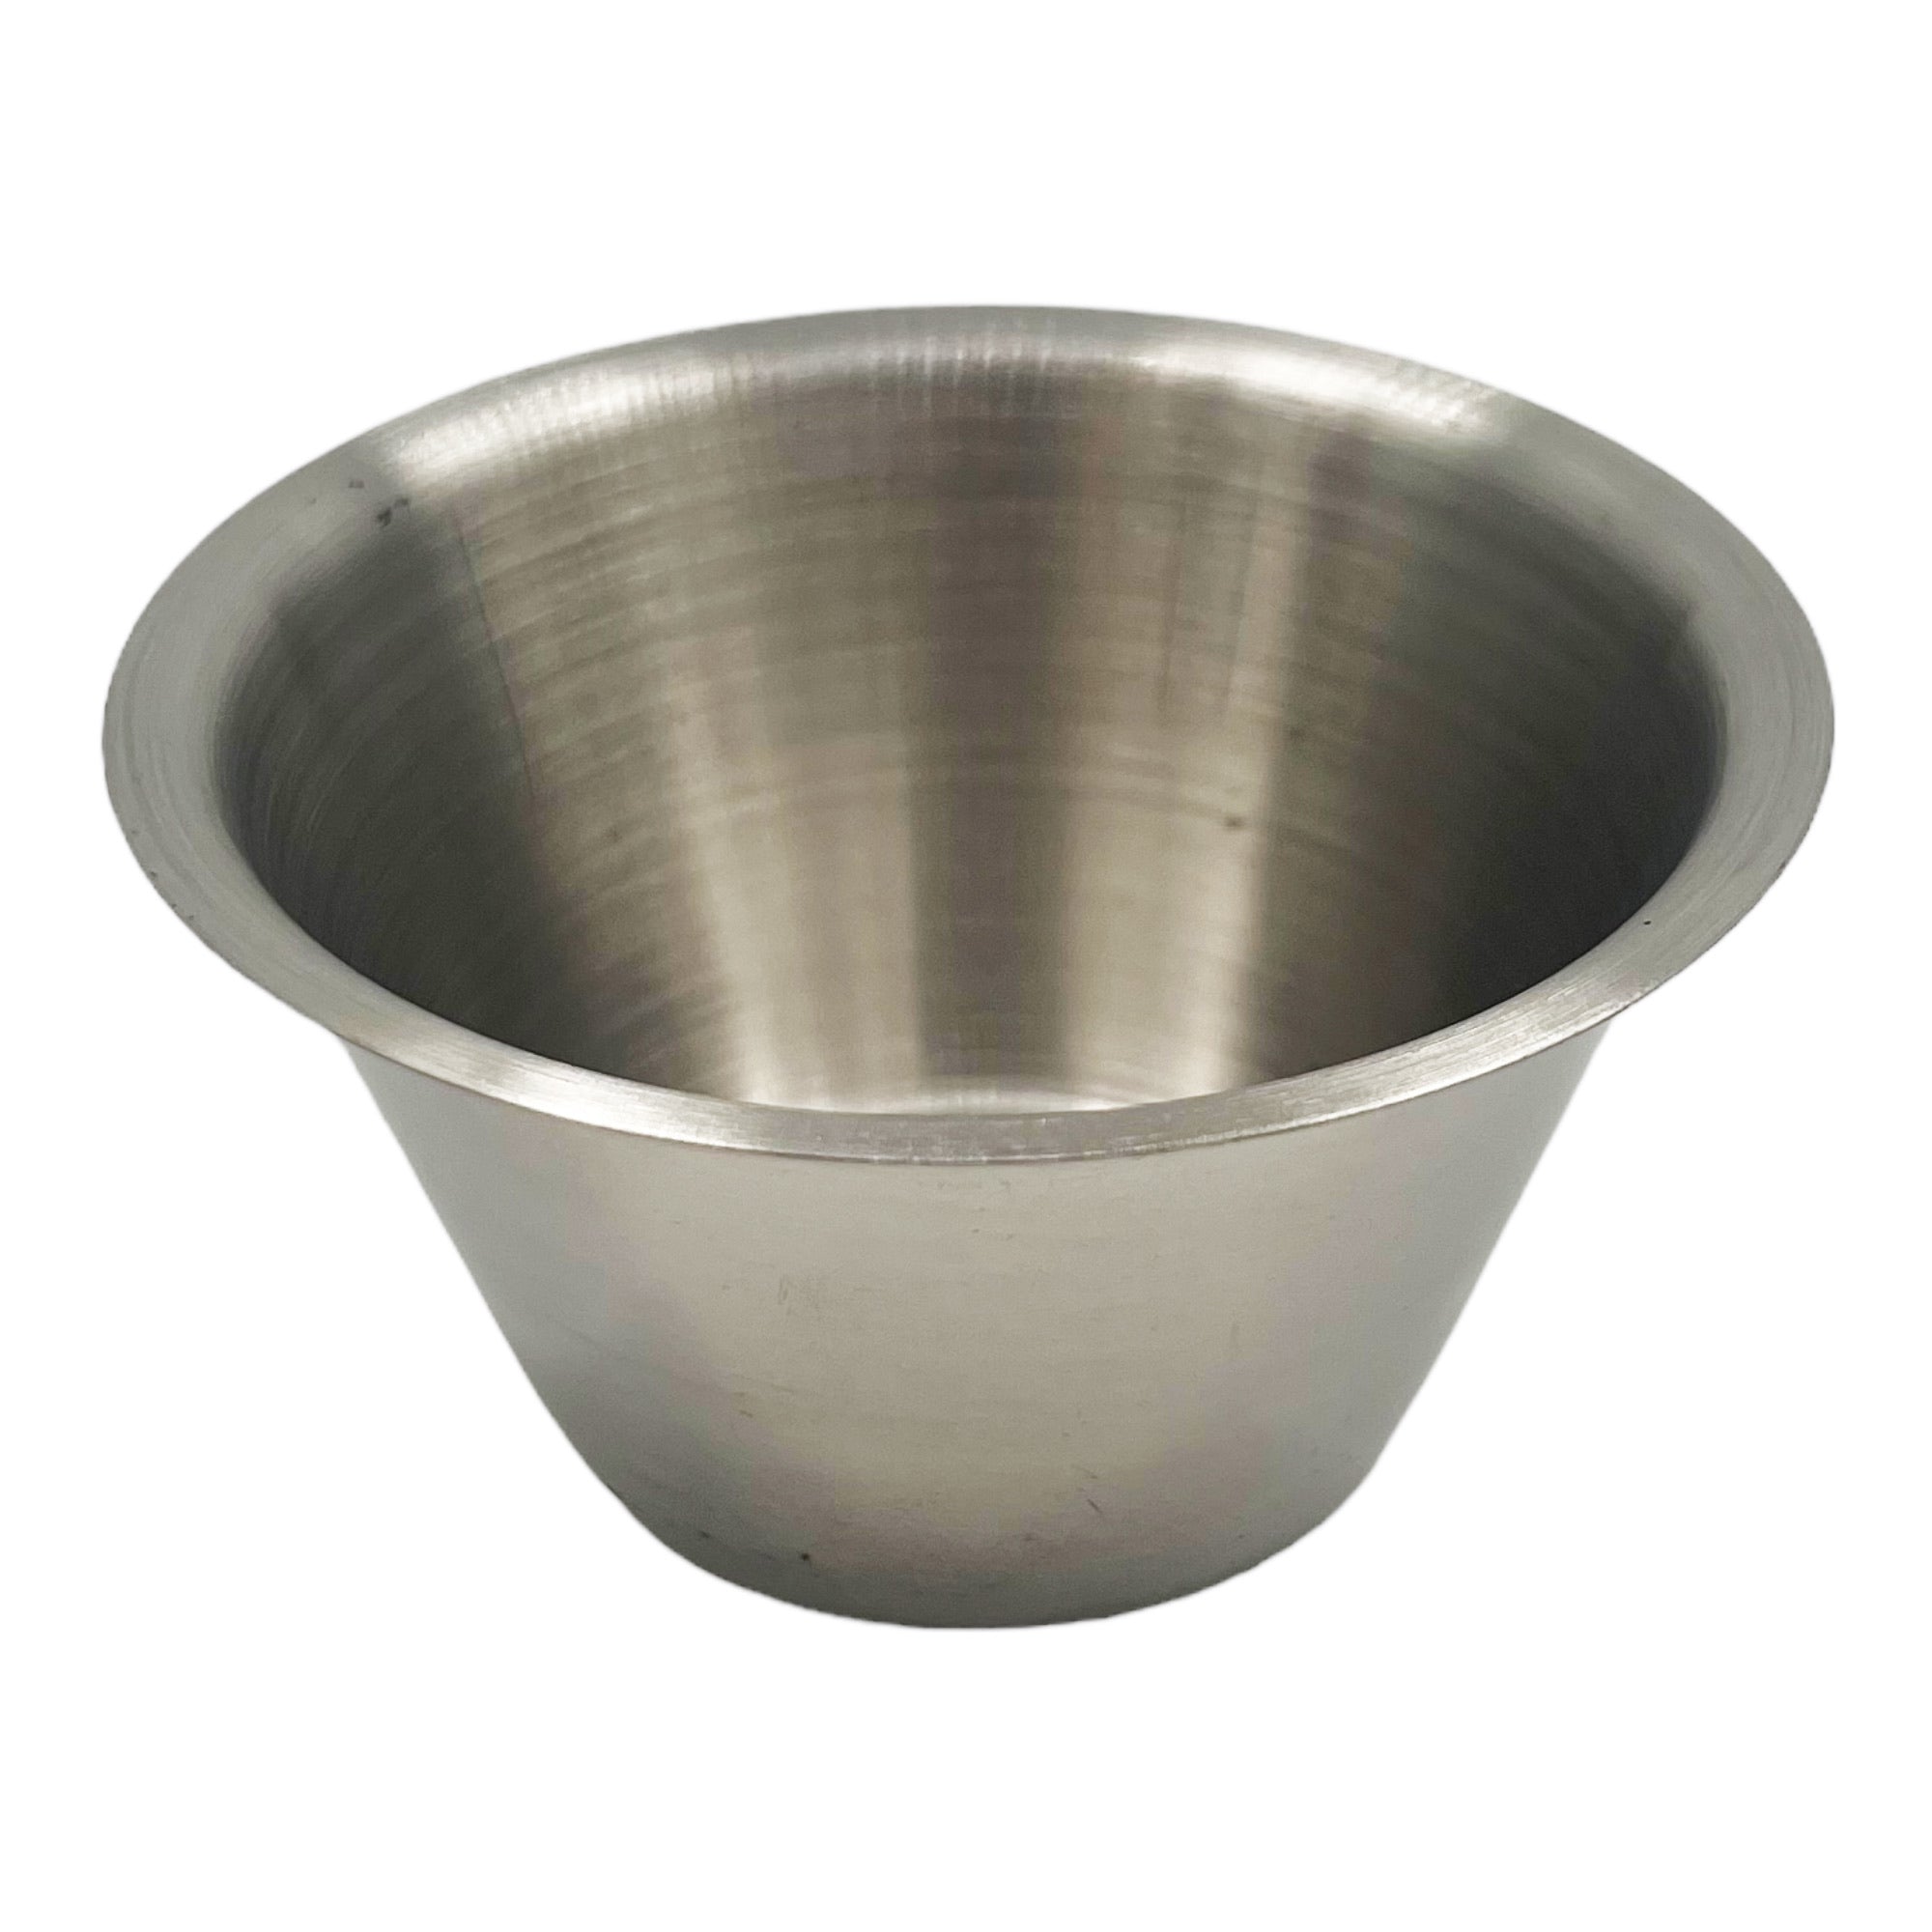 Eson - Stainless Steel Shaving Bowl Cup Silver 5.5x10cm